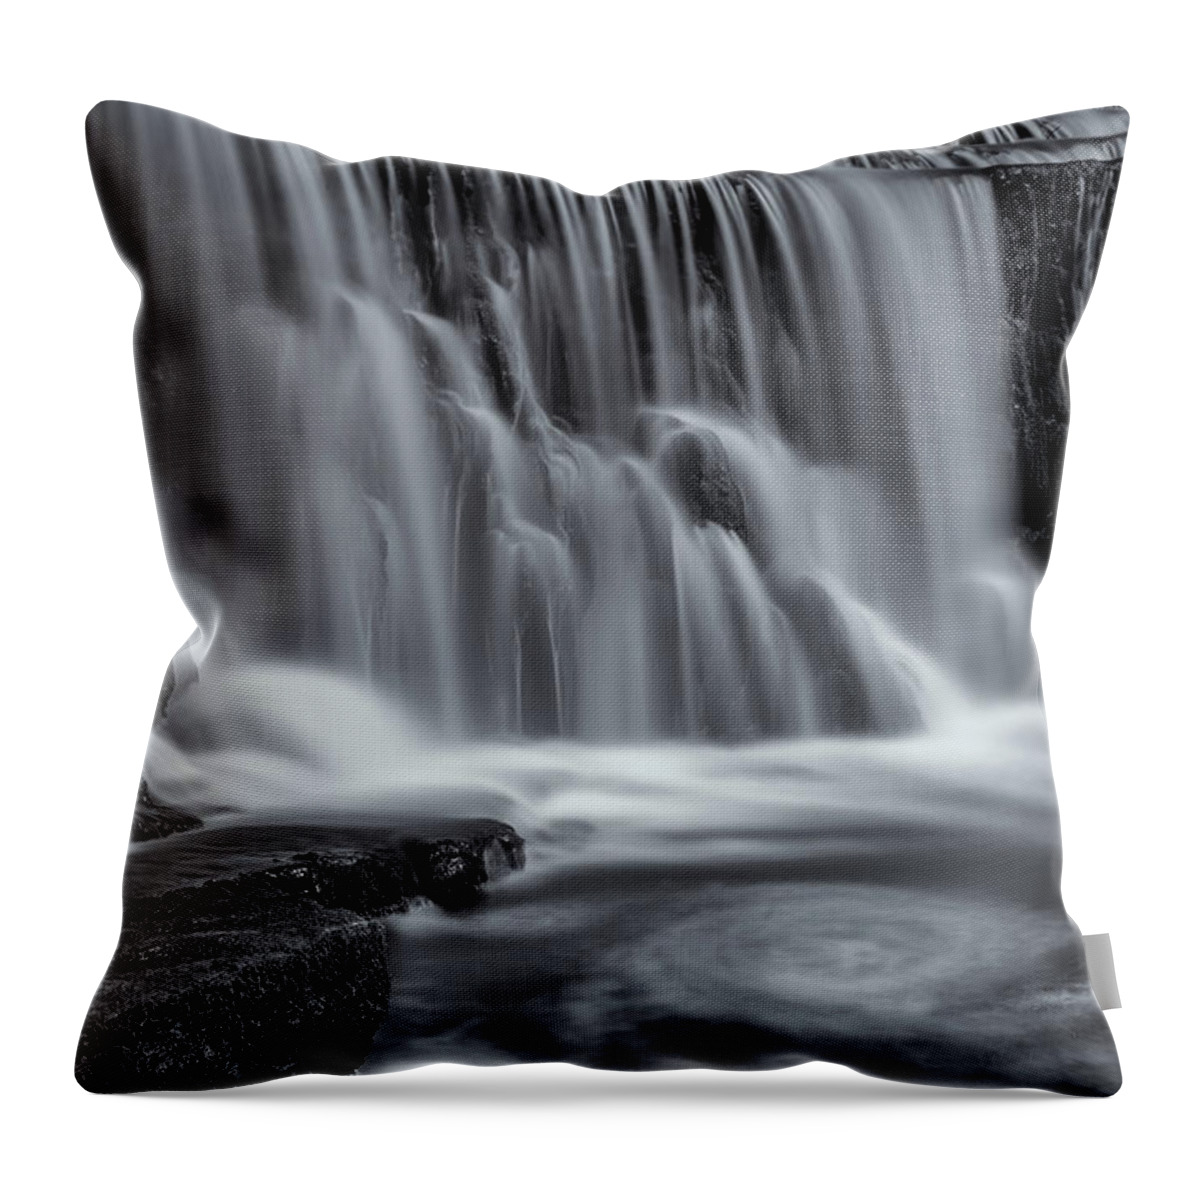 Monsal Dale Weir Throw Pillow featuring the photograph Monsal Dale Weir by Rob Davies